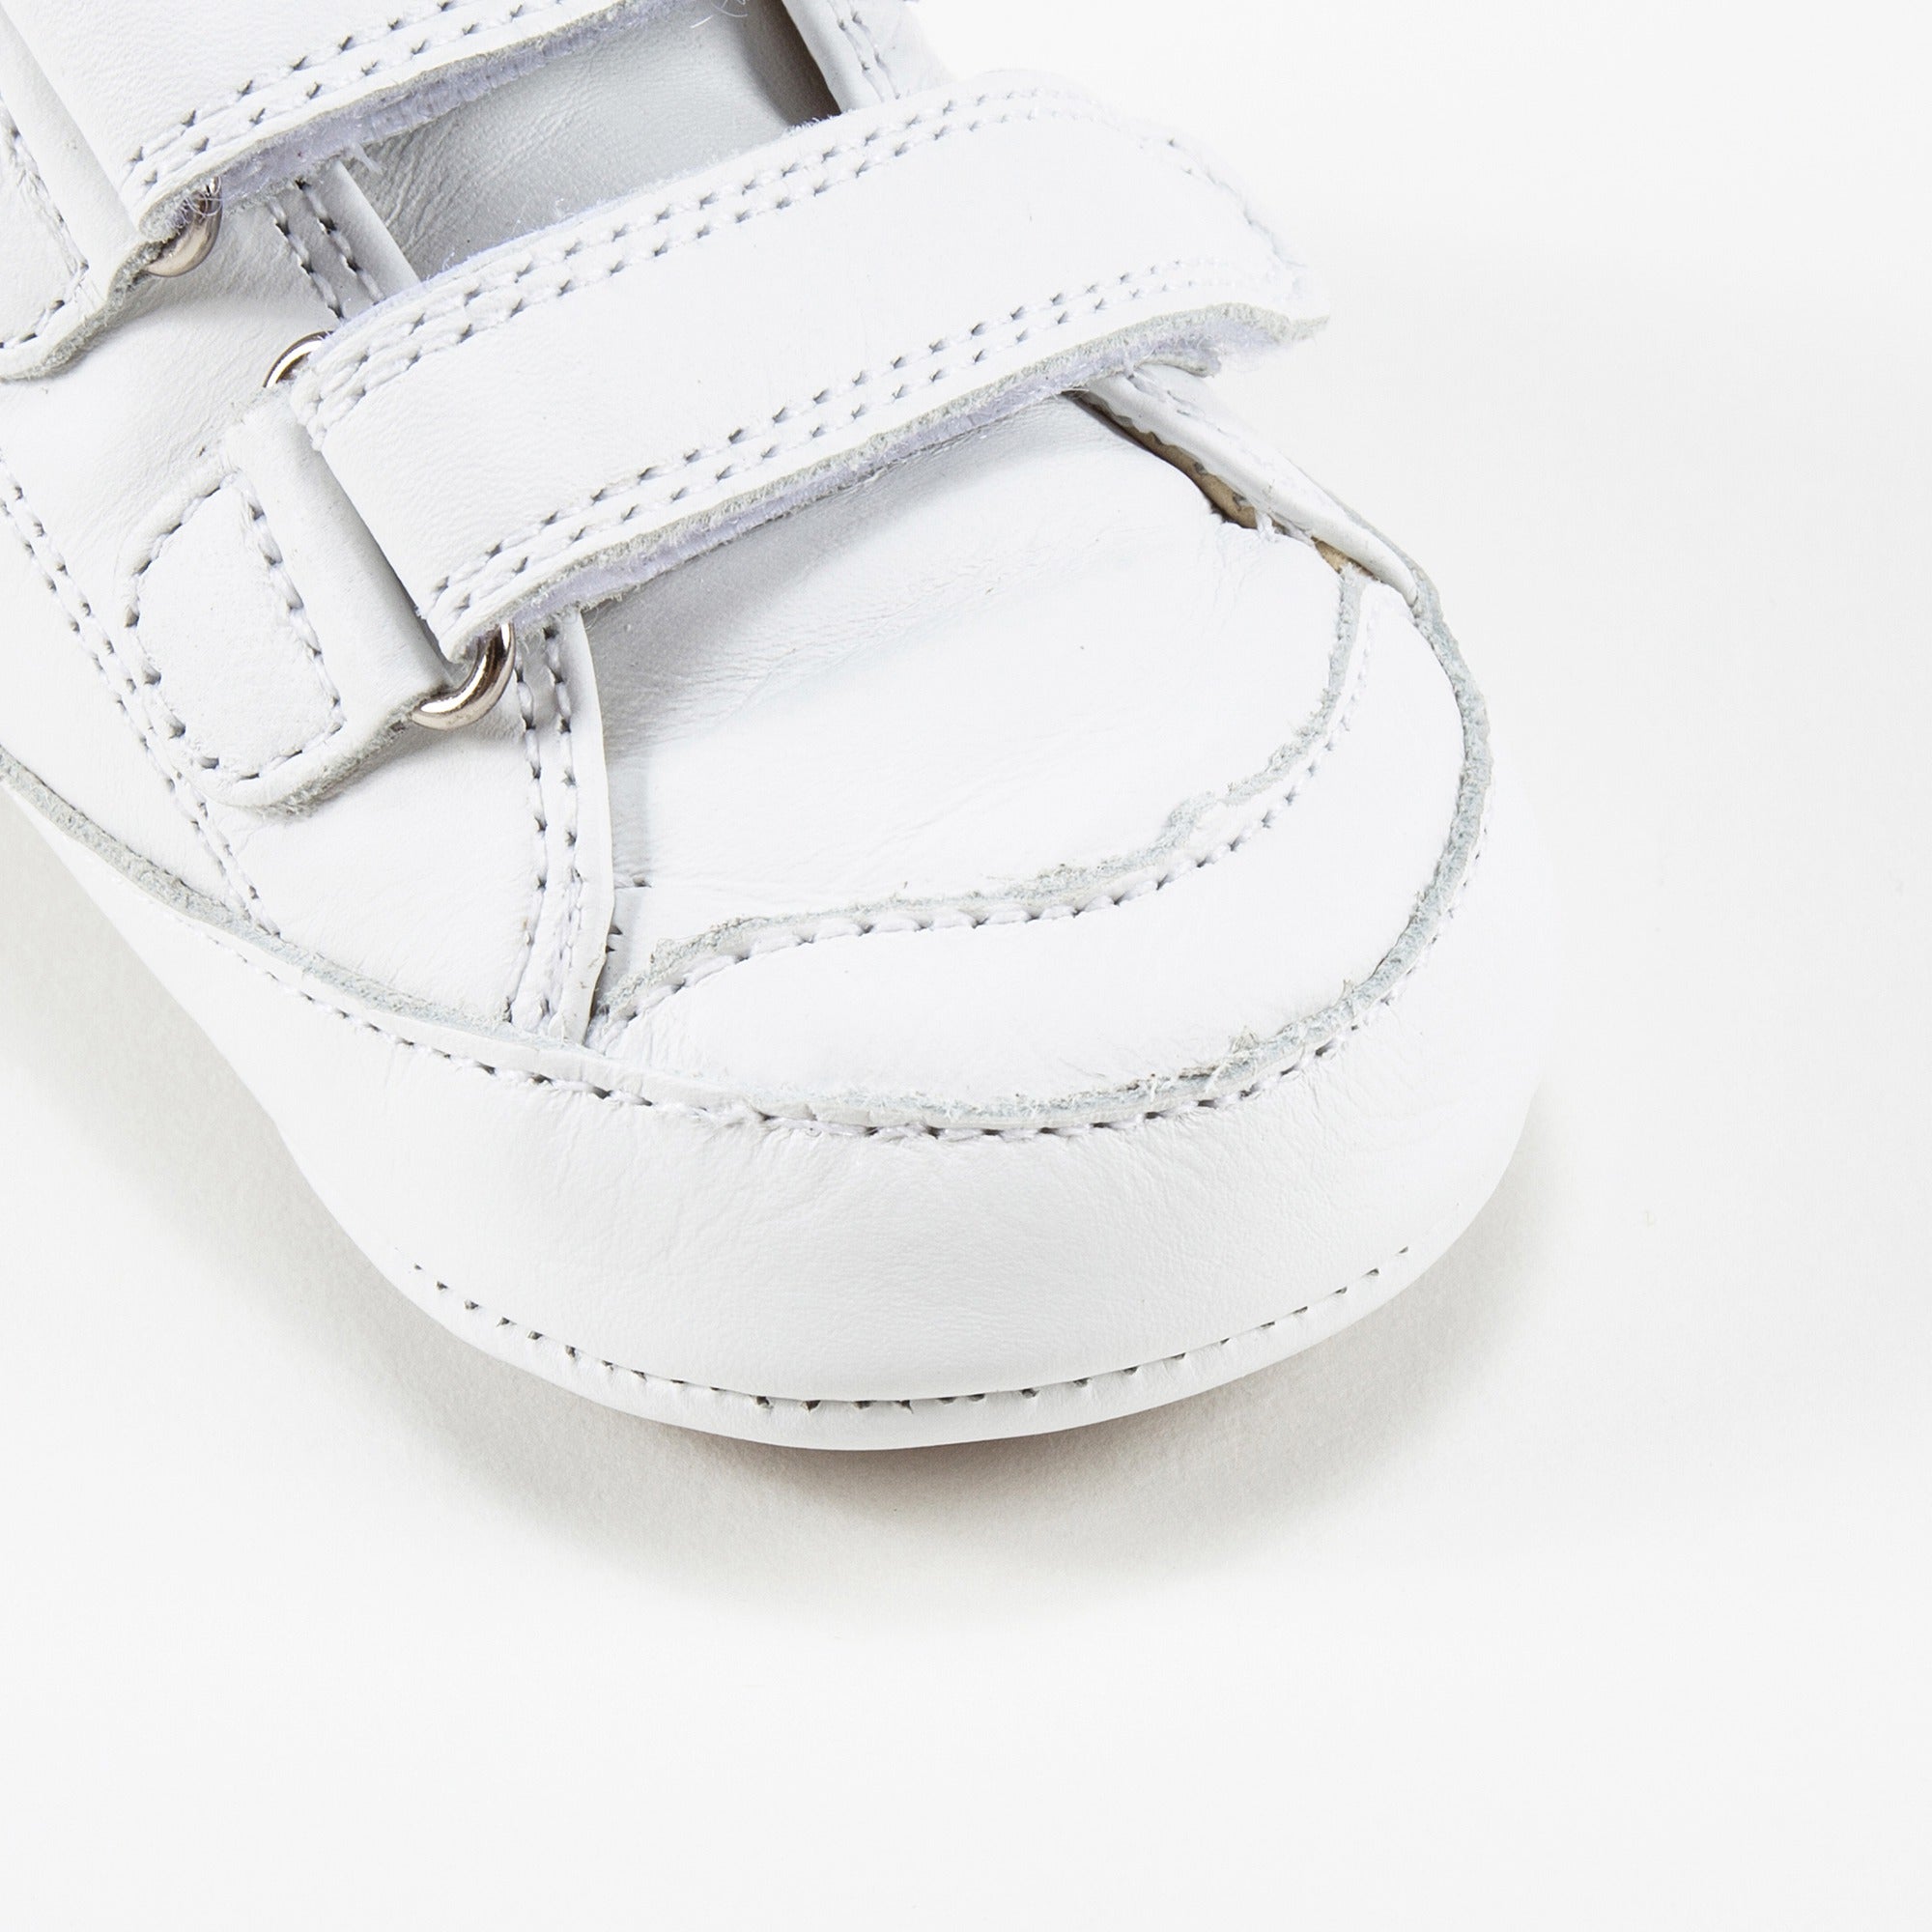 Baby White Leather Sneaker Casual